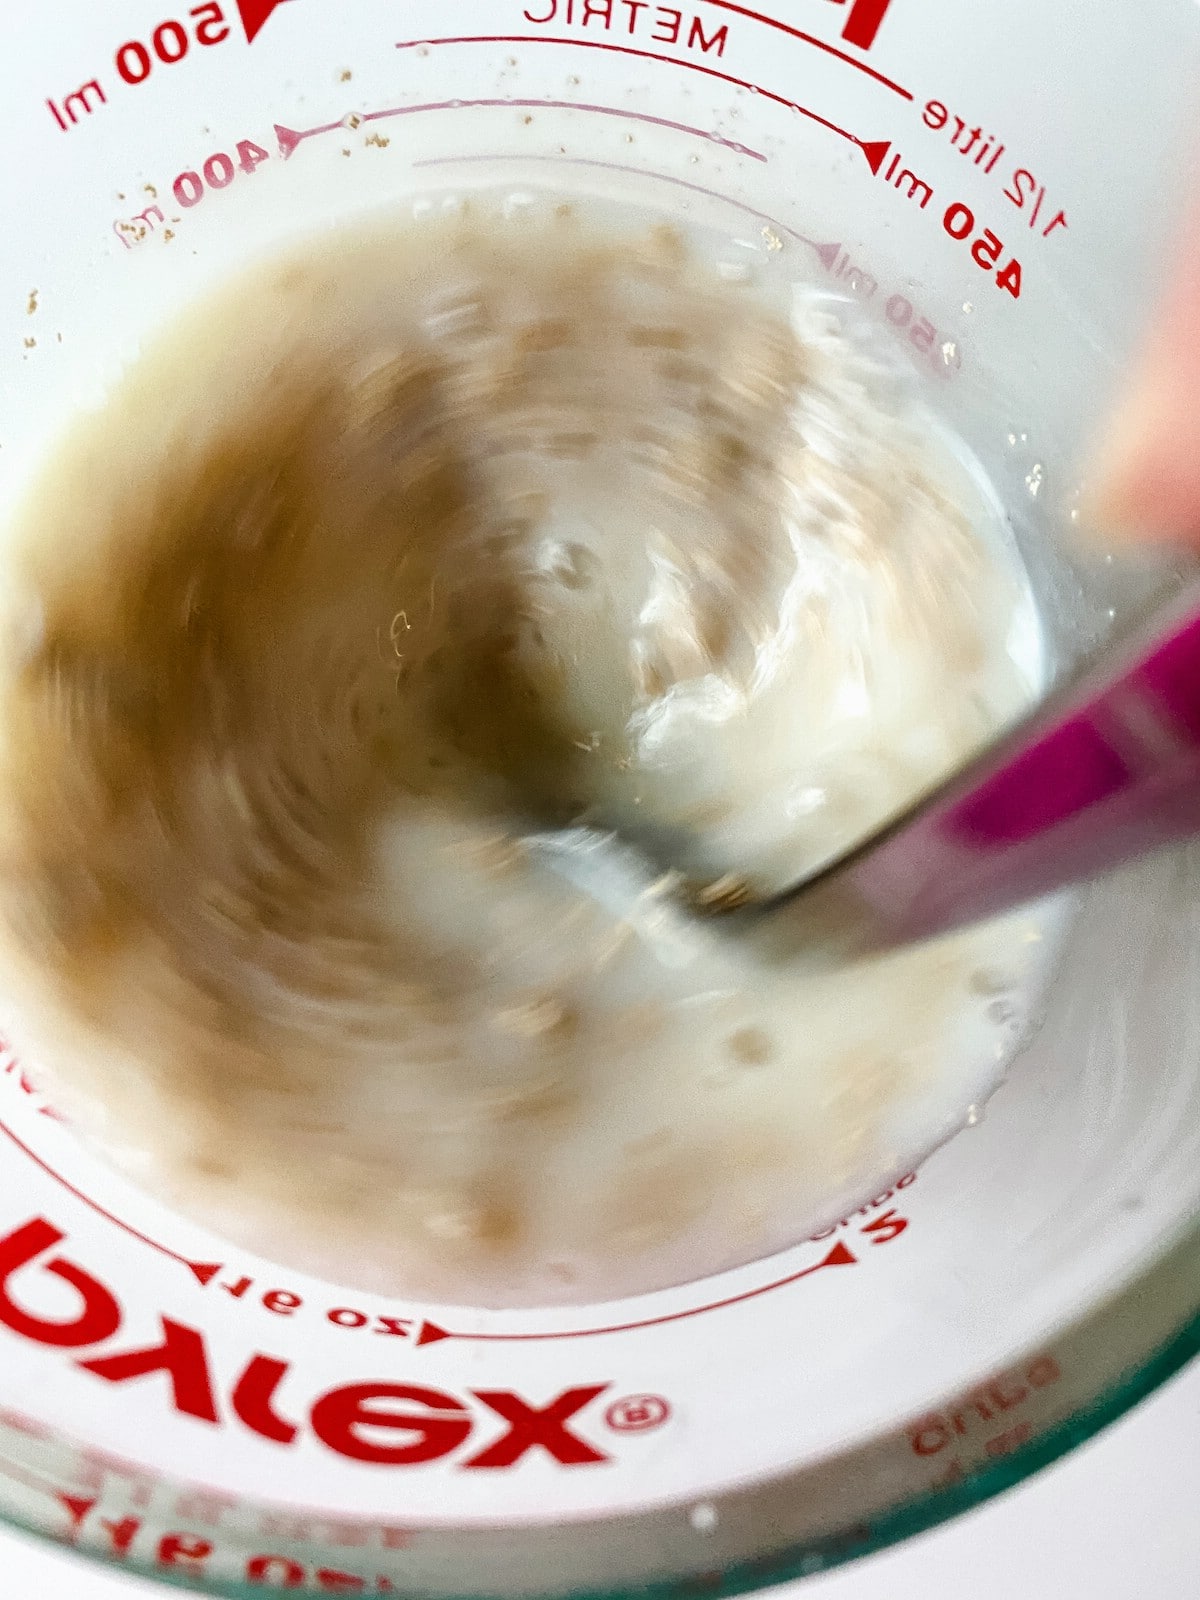 Mixing yeast in measuring cup